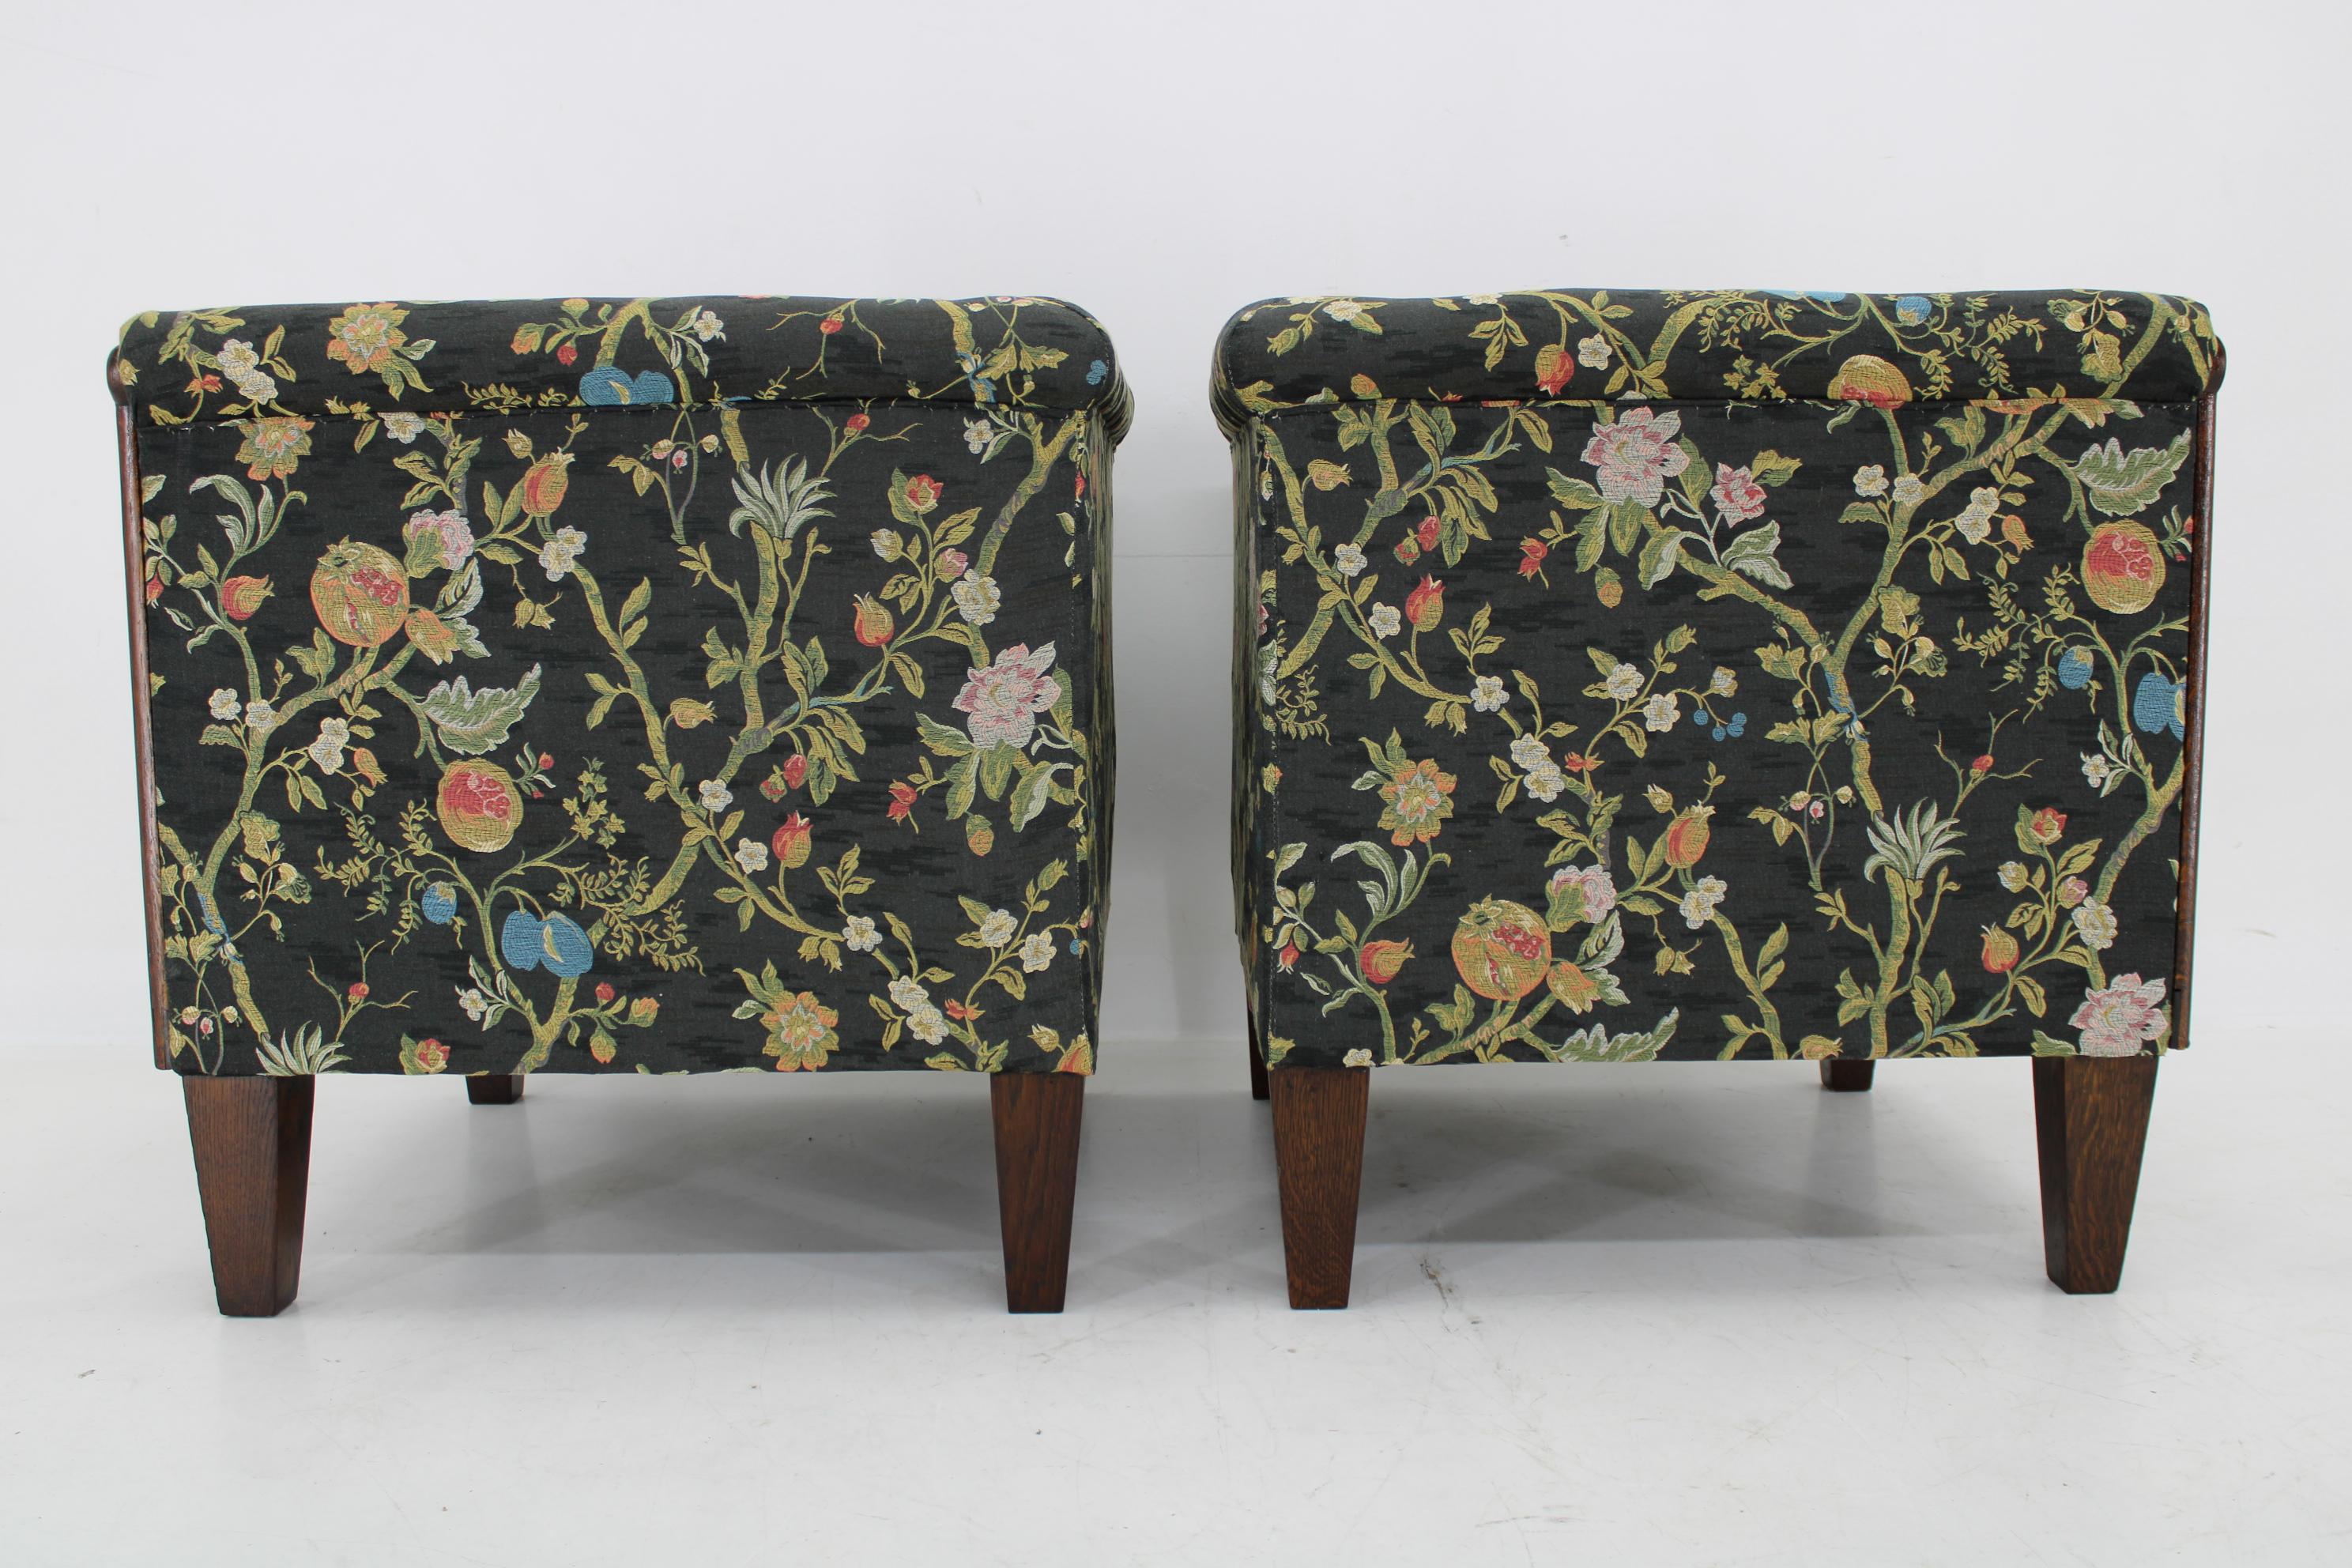 1930s Restored Pair of Art Deco Armchairs , Czechoslovakia For Sale 1